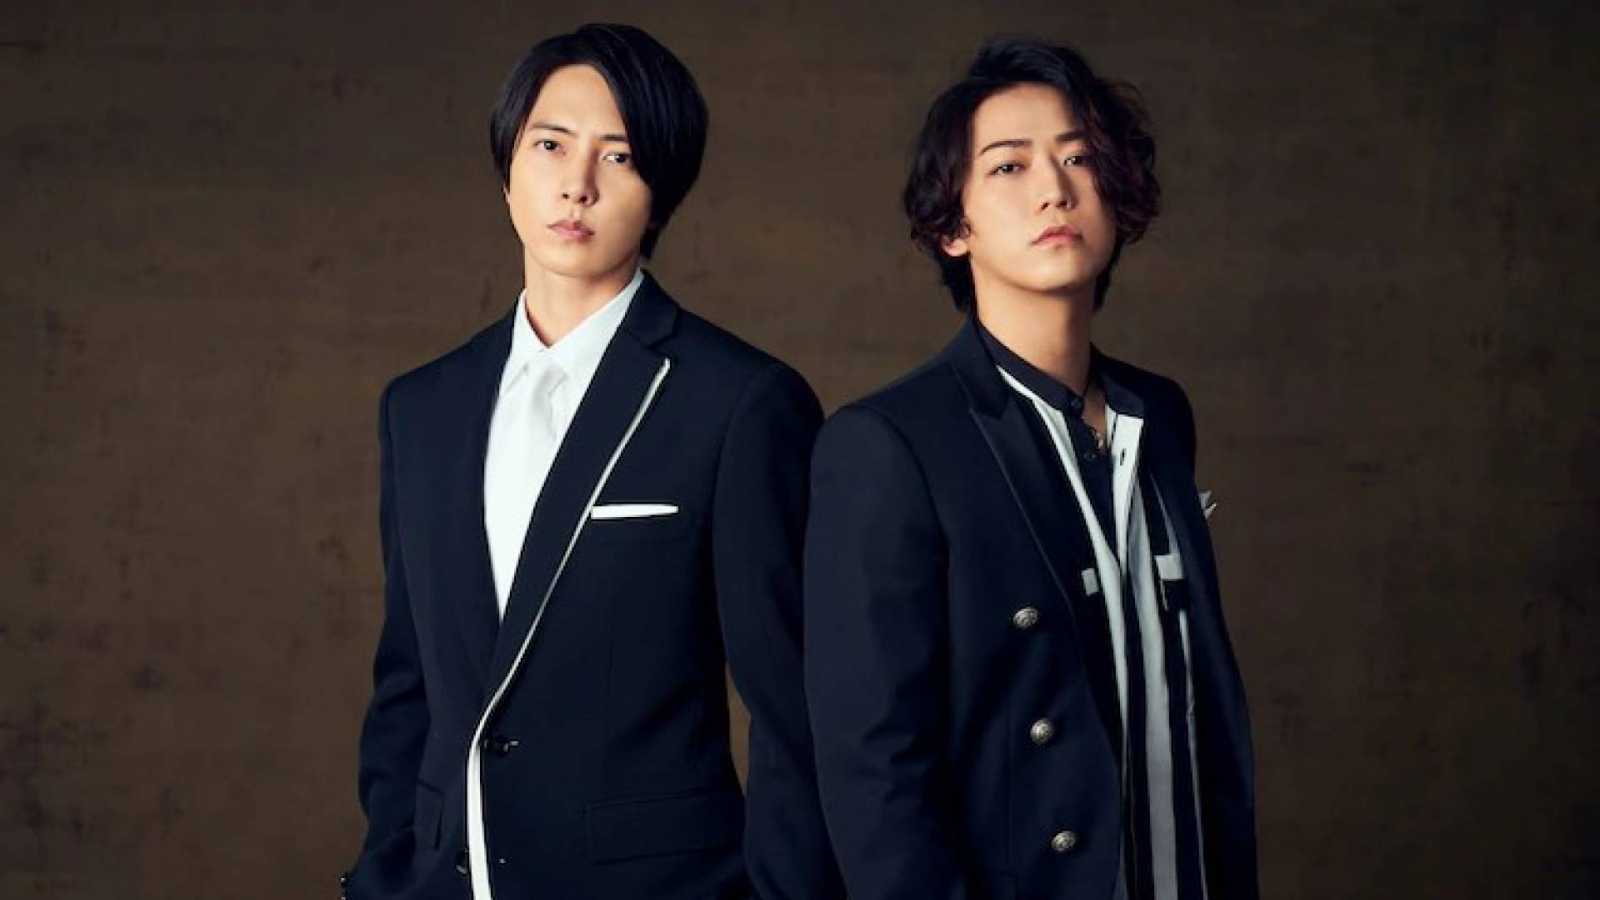 Kame to YamaP to Release First Album © Kame to YamaP. All rights reserved.